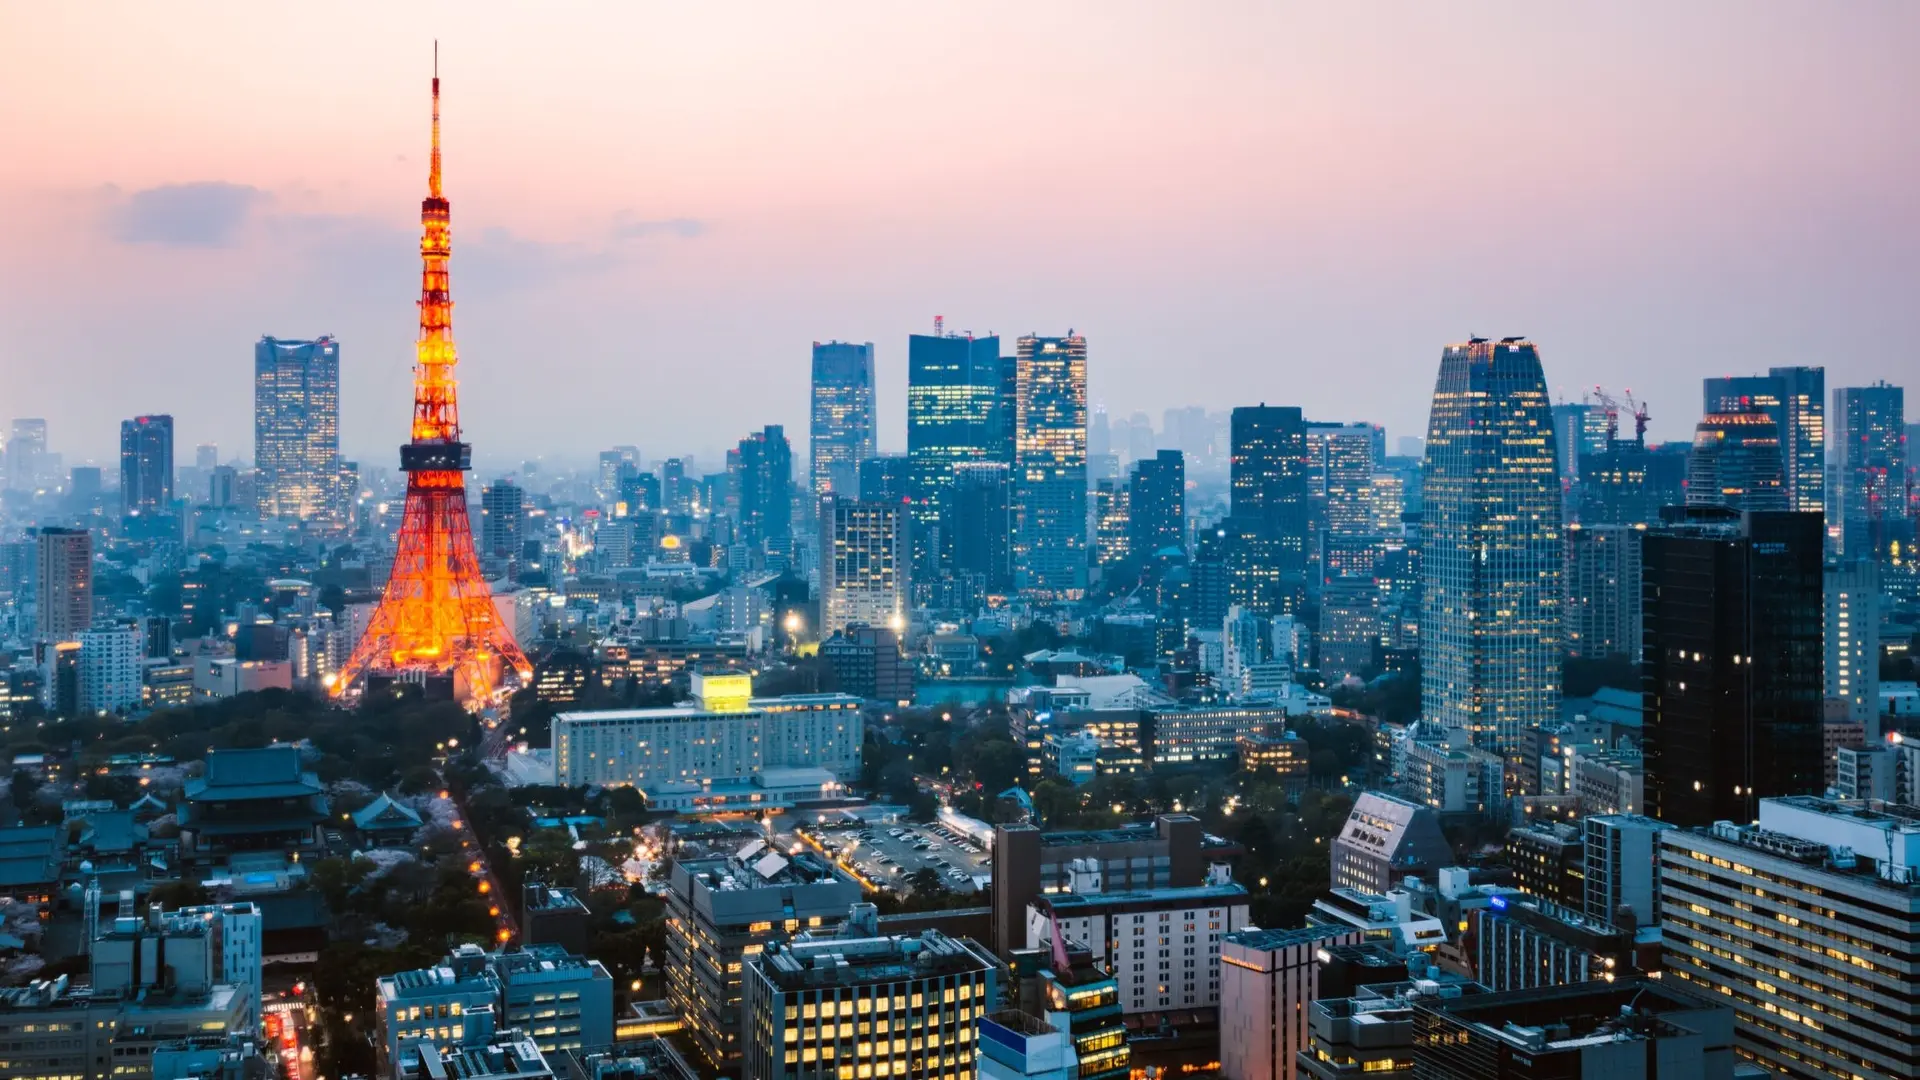 View of The Tokyo Tower or "Shiba-Koen" taken in nighttime lighting up the city with a natural warm colour.